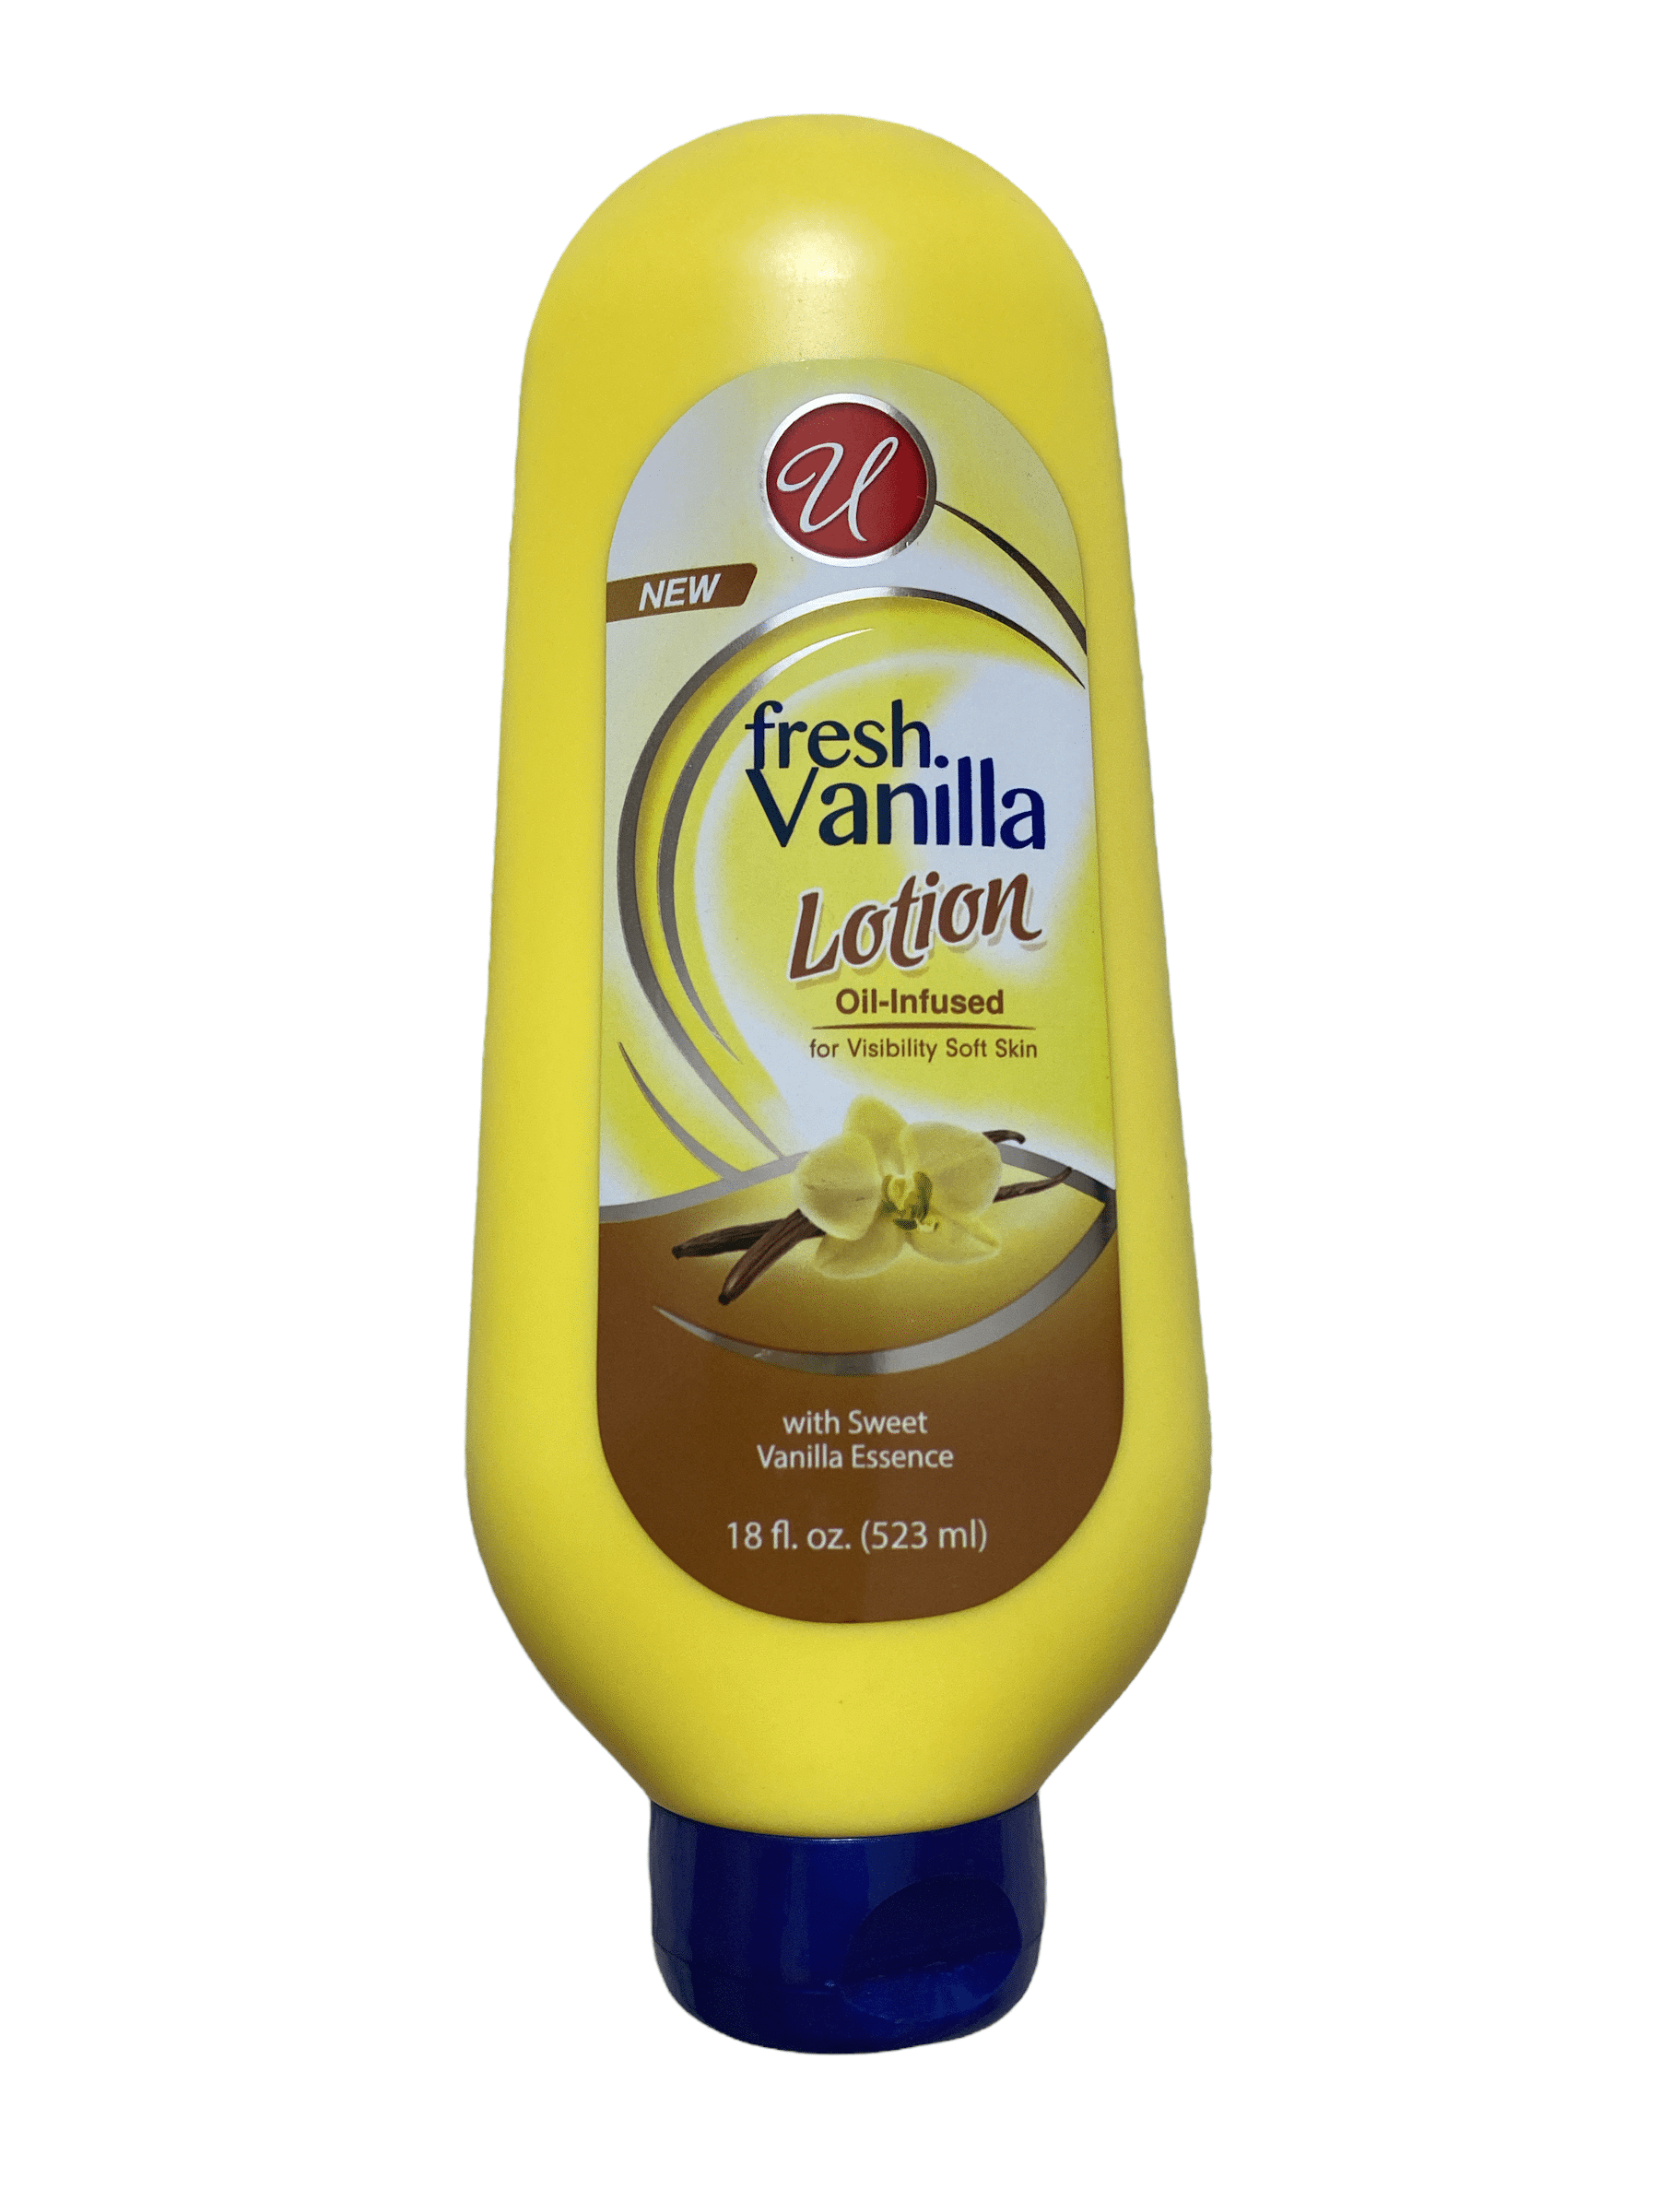 Fresh Vanilla Lotion Oil-Infused for Visibility Soft Skin with Sweet Vanilla  Essence 18 oz 523 ml Each Pack of 2 